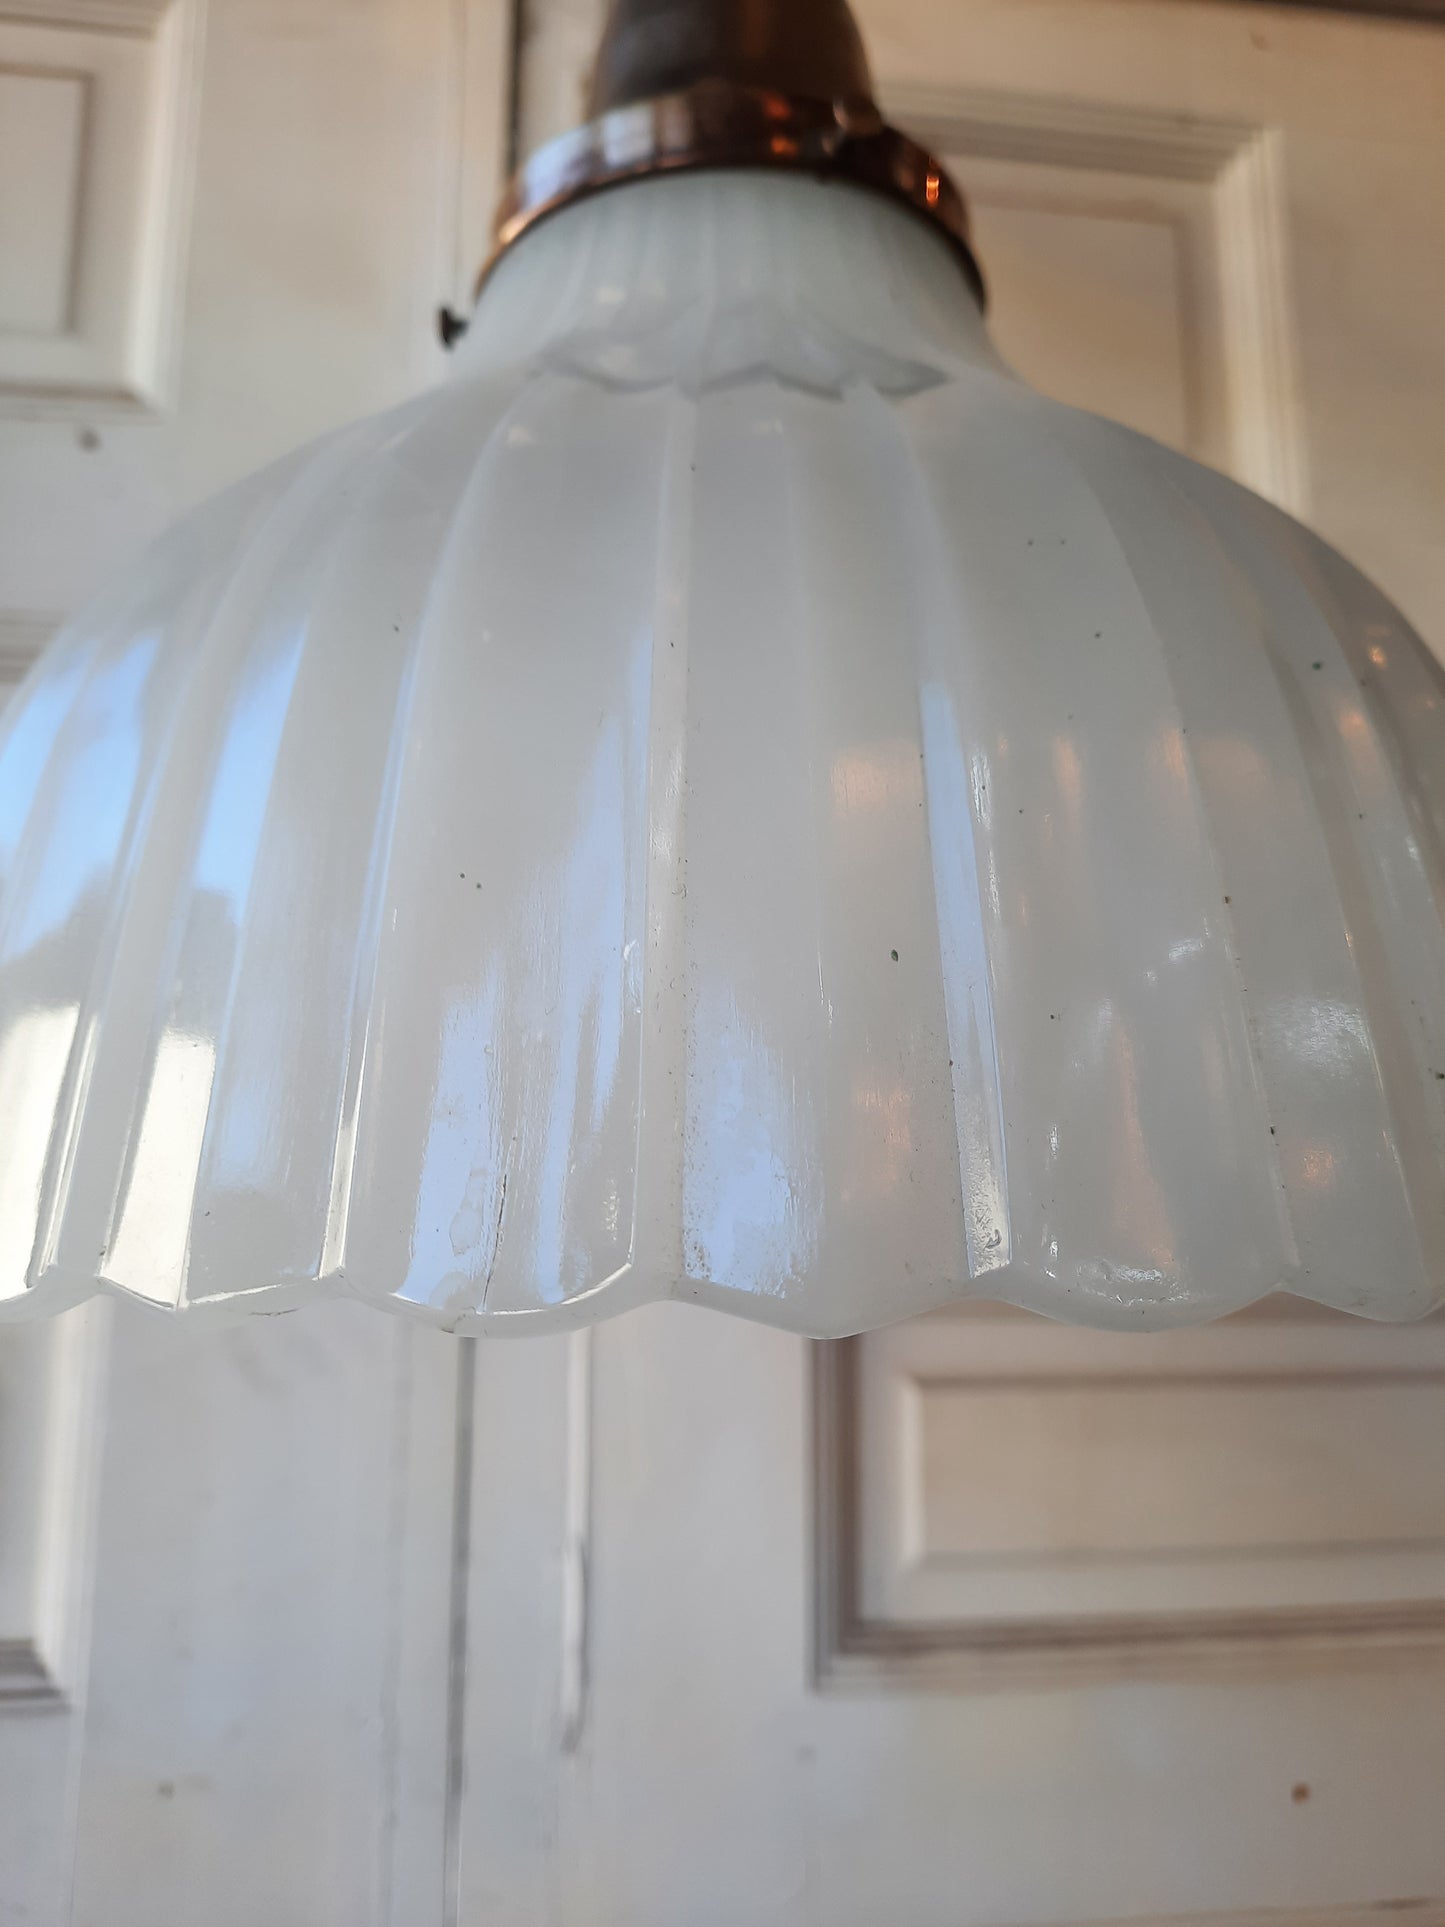 Antique Tulip Shade Pendant Light, Hanging Vintage Light with White Glass Shade with Fluted Edges 121201